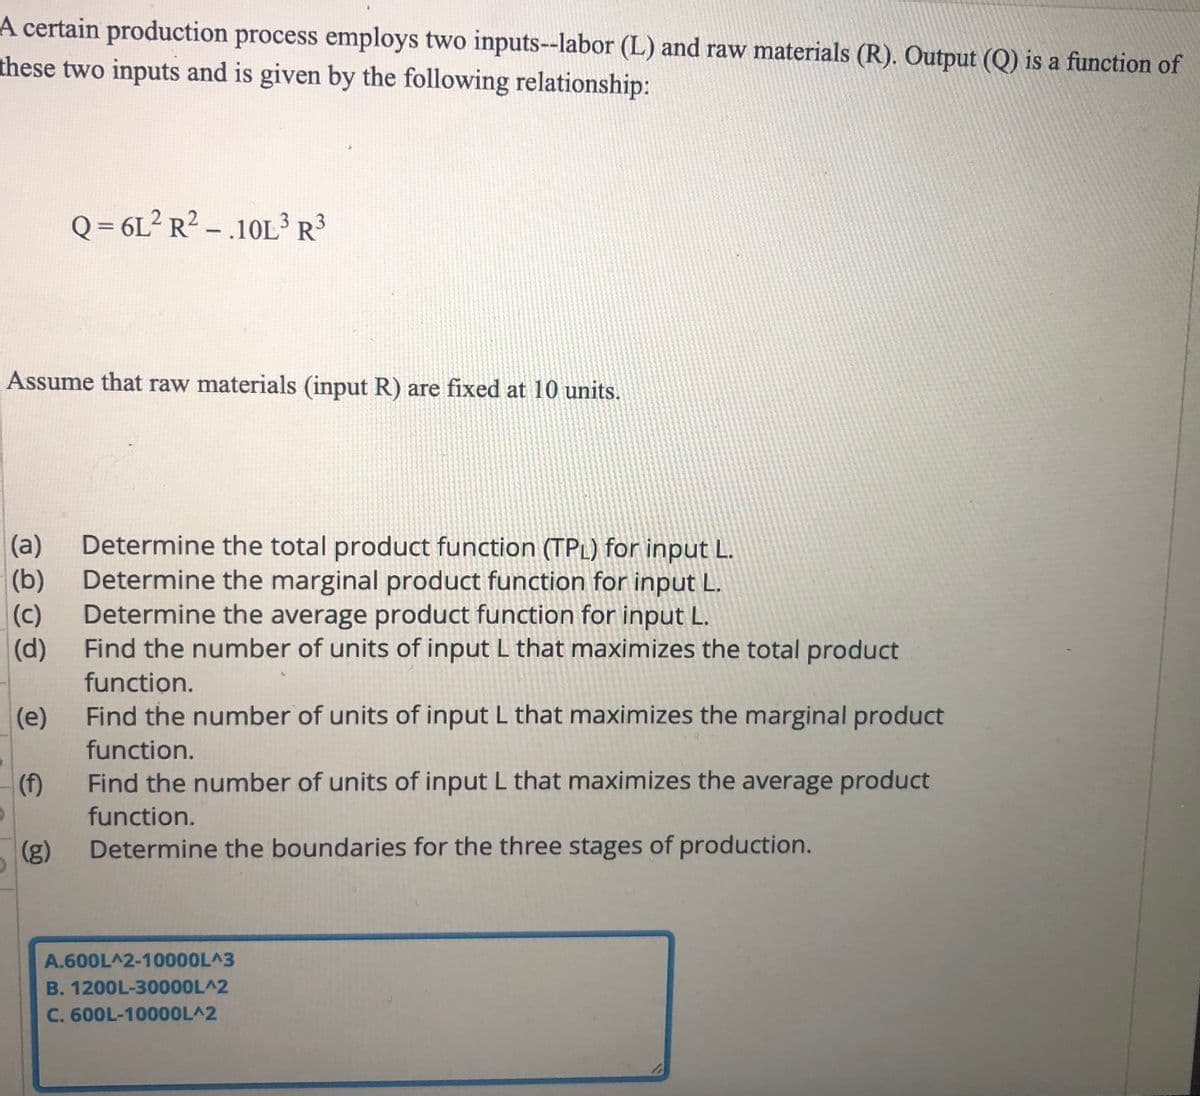 A certain production process employs two inputs--labor (L) and raw materials (R). Output (Q) is a function of
these two inputs and is given by the following relationship:
Q = 6L² R? - .10L R3
Assume that raw materials (input R) are fixed at 10 units.
(a)
Determine the total product function (TPL) for input L.
(b)
Determine the marginal product function for input L.
(c)
Determine the average product function for input L.
(d)
Find the number of units of input L that maximizes the total product
function.
(e)
Find the number of units of input L that maximizes the marginal product
function.
(f)
Find the number of units of input L that maximizes the average product
function.
(8)
Determine the boundaries for the three stages of production.
A.600L^2-10000L^3
B. 1200L-30000L^2
C. 600L-1000OL^2
